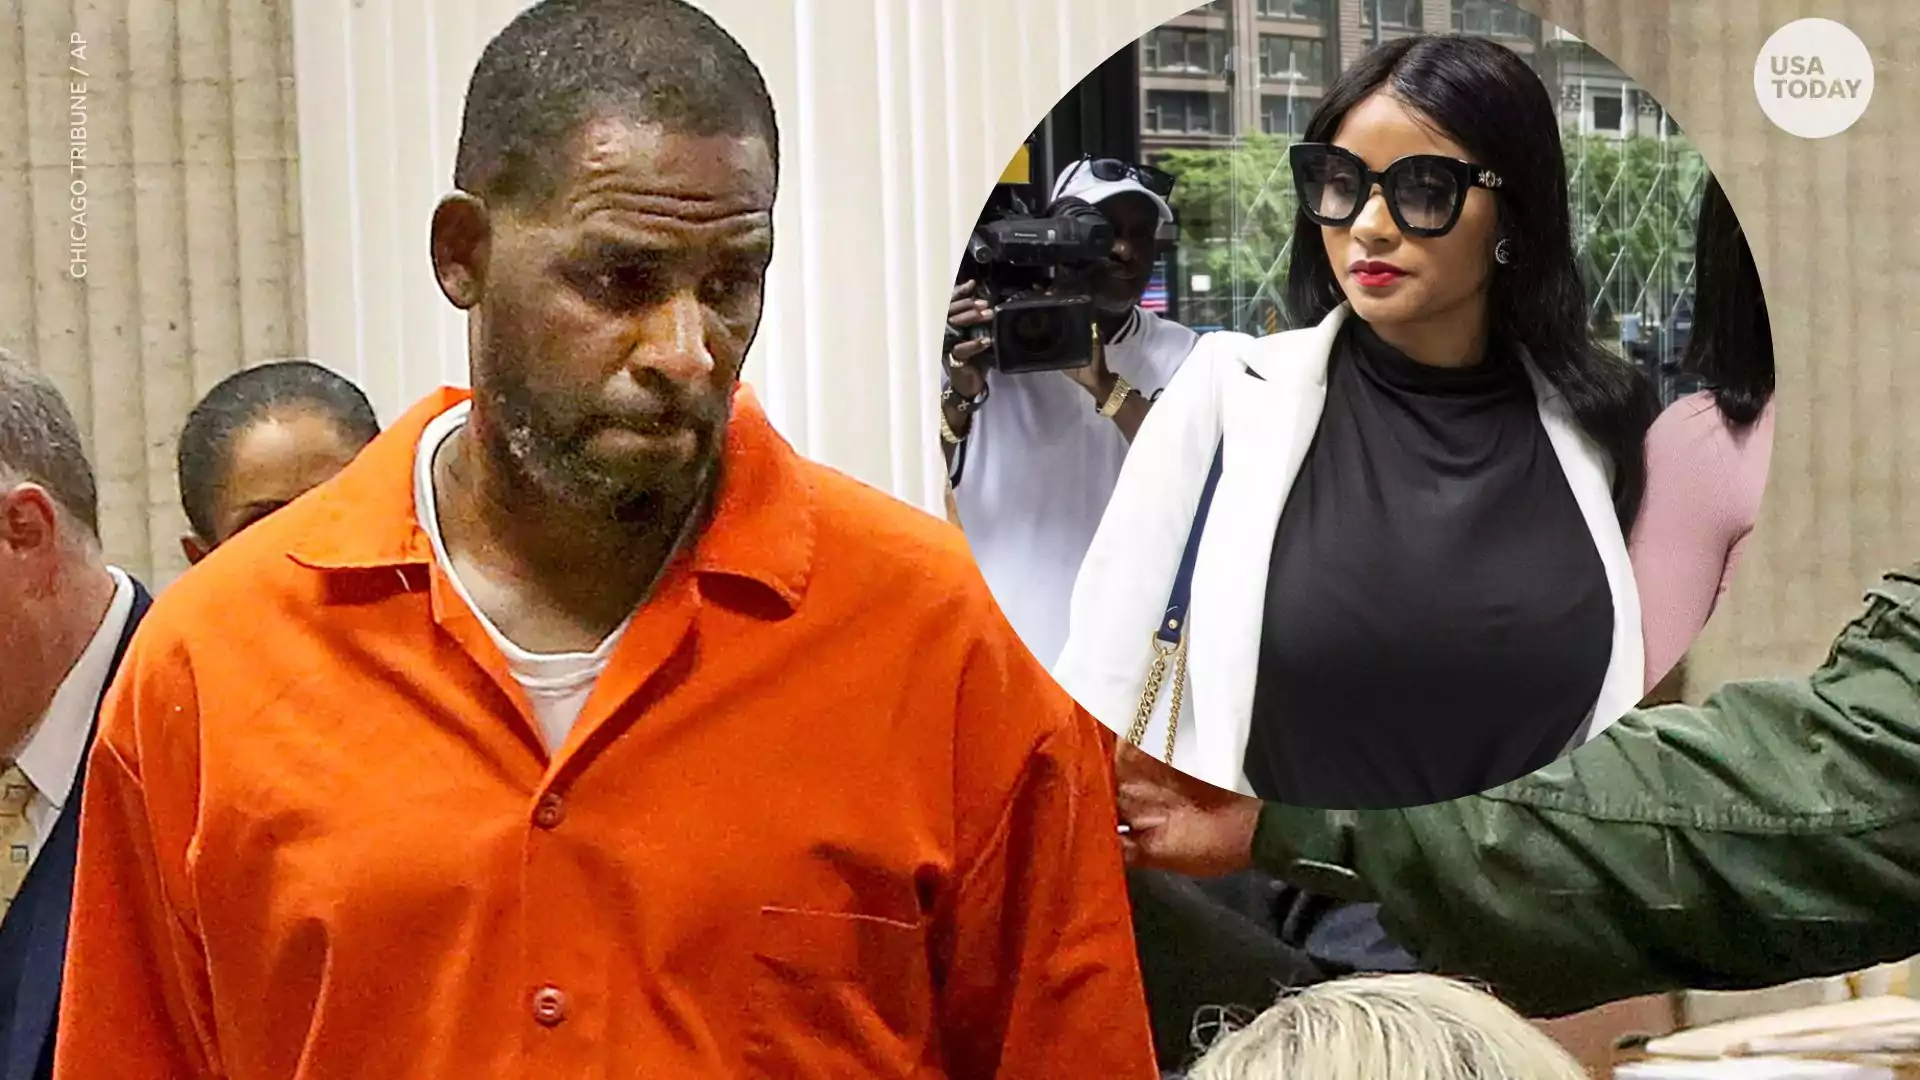 R. Kelly Engaged To Alleged Victim Joycelyn Savage After Being Sentenced To 30 Years In Prison